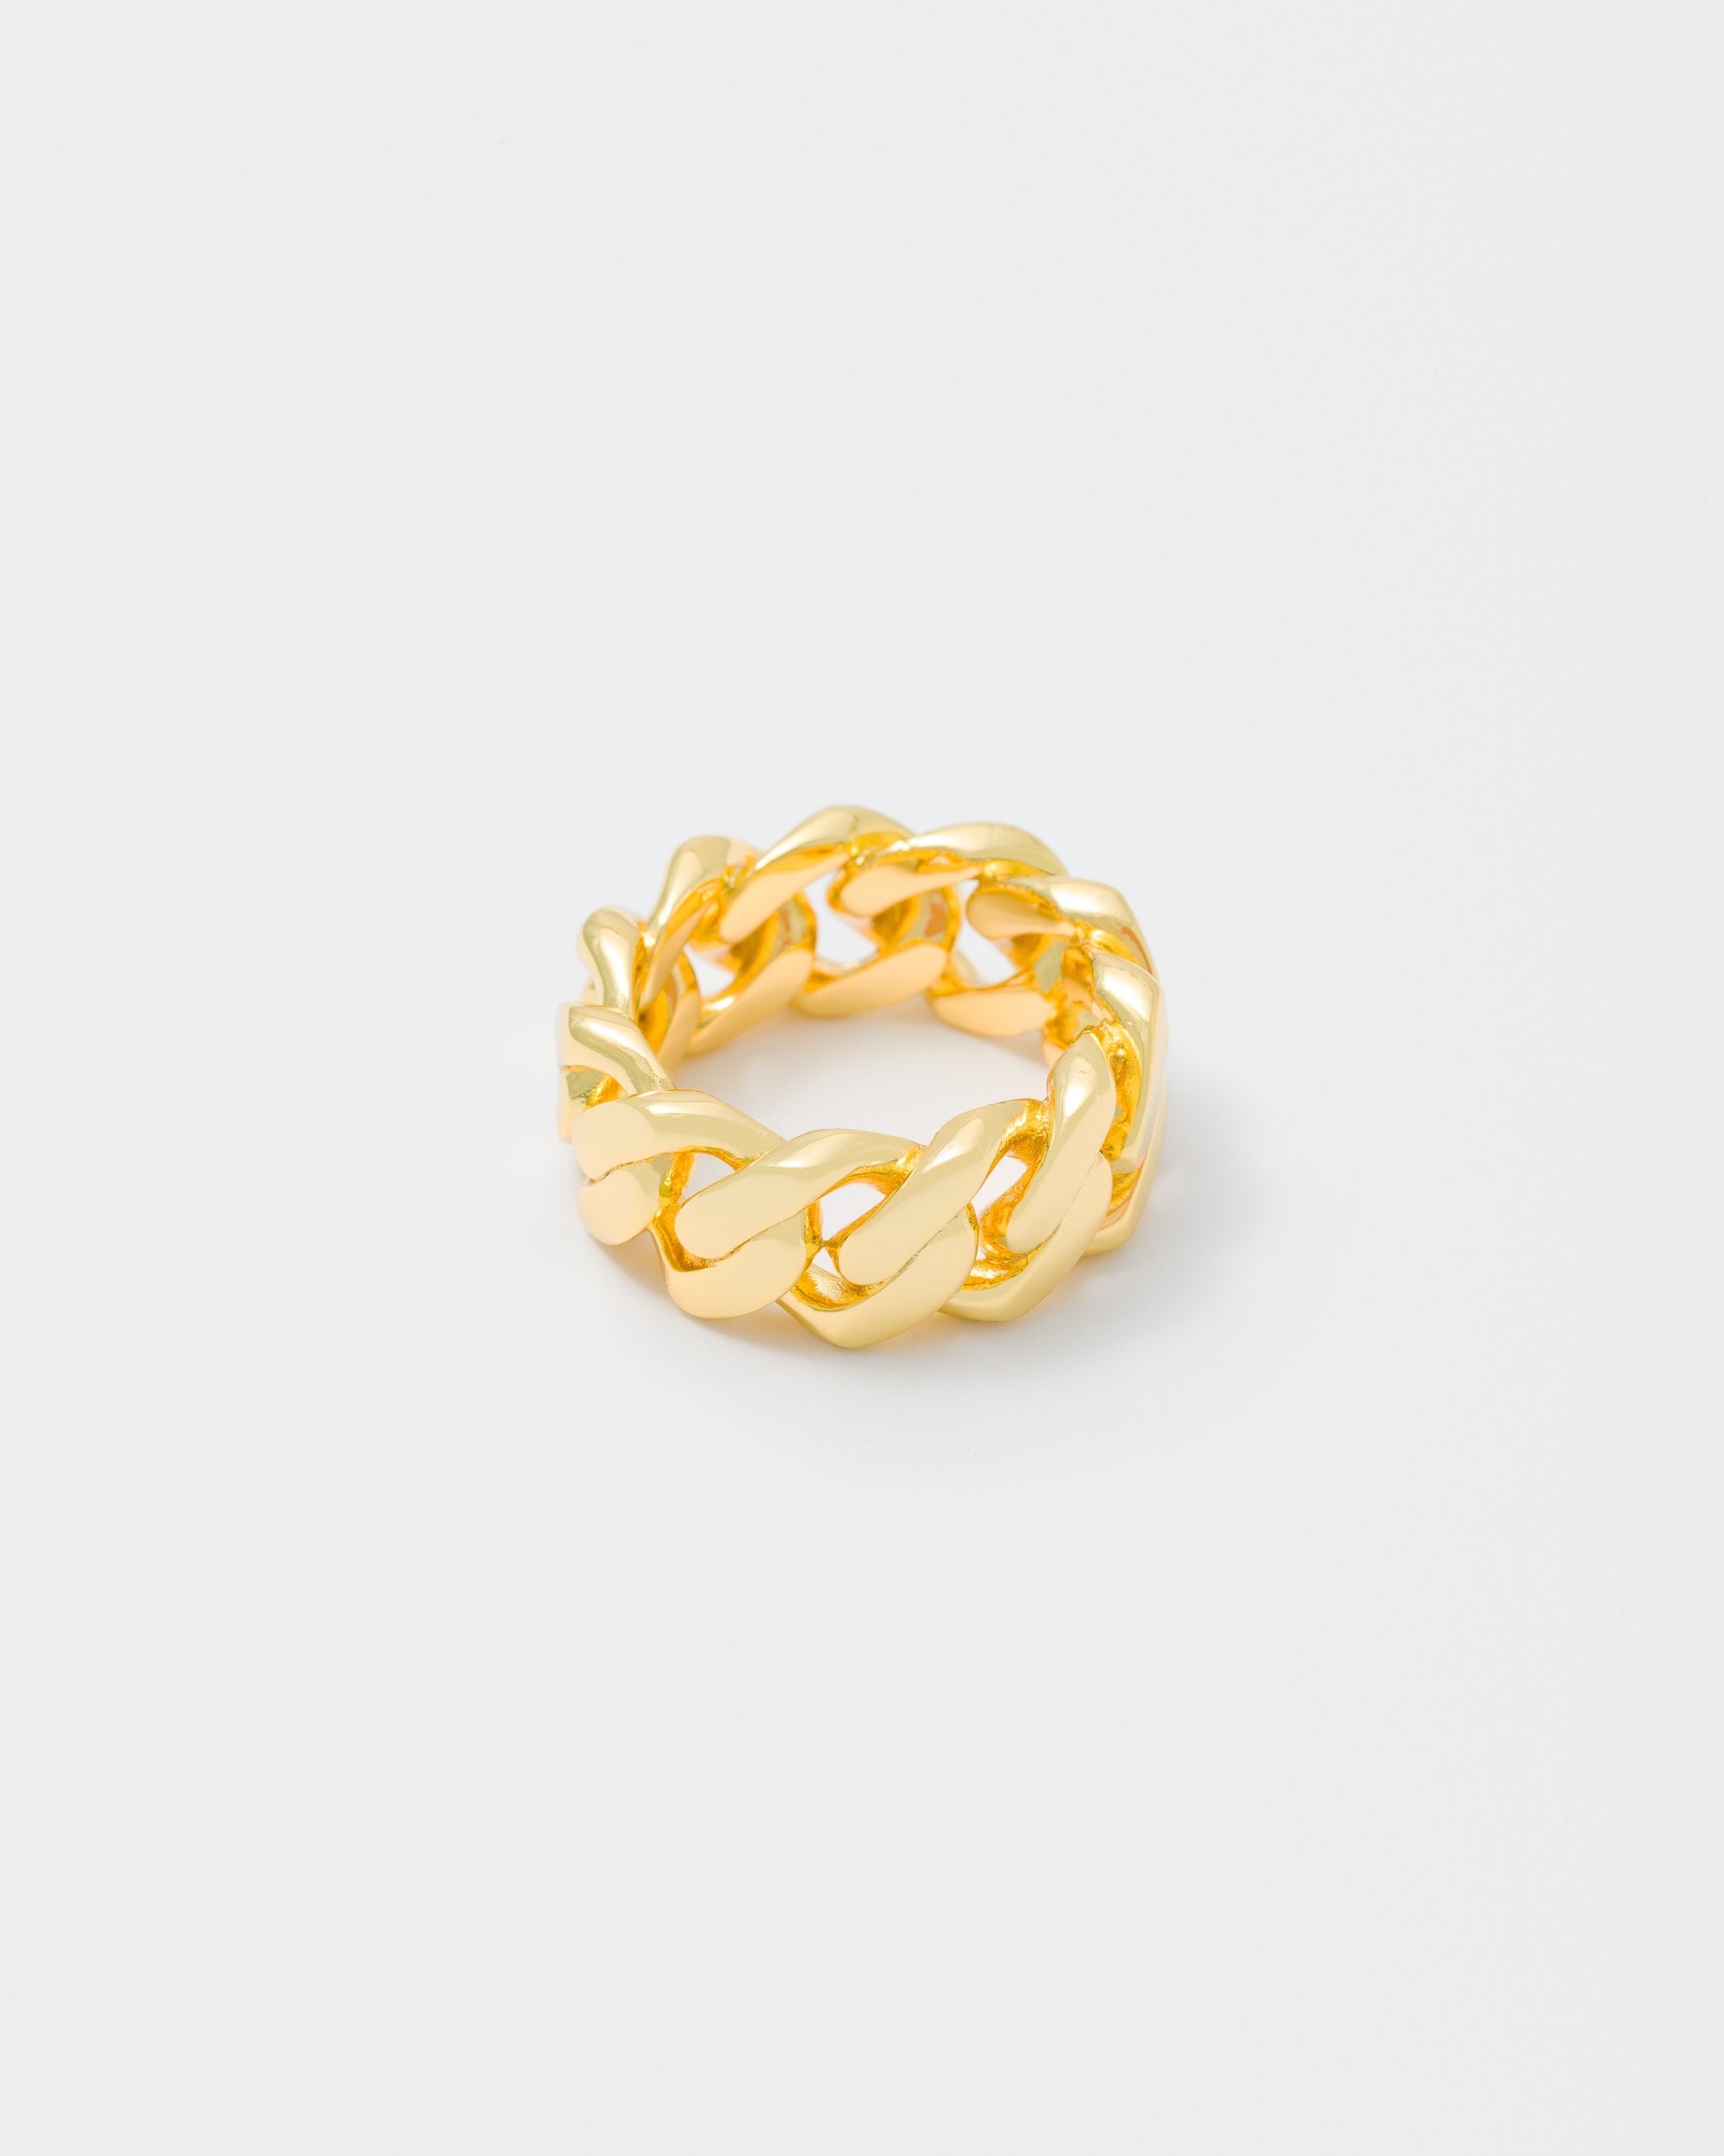 detail of gold cuban ring for man end woman 